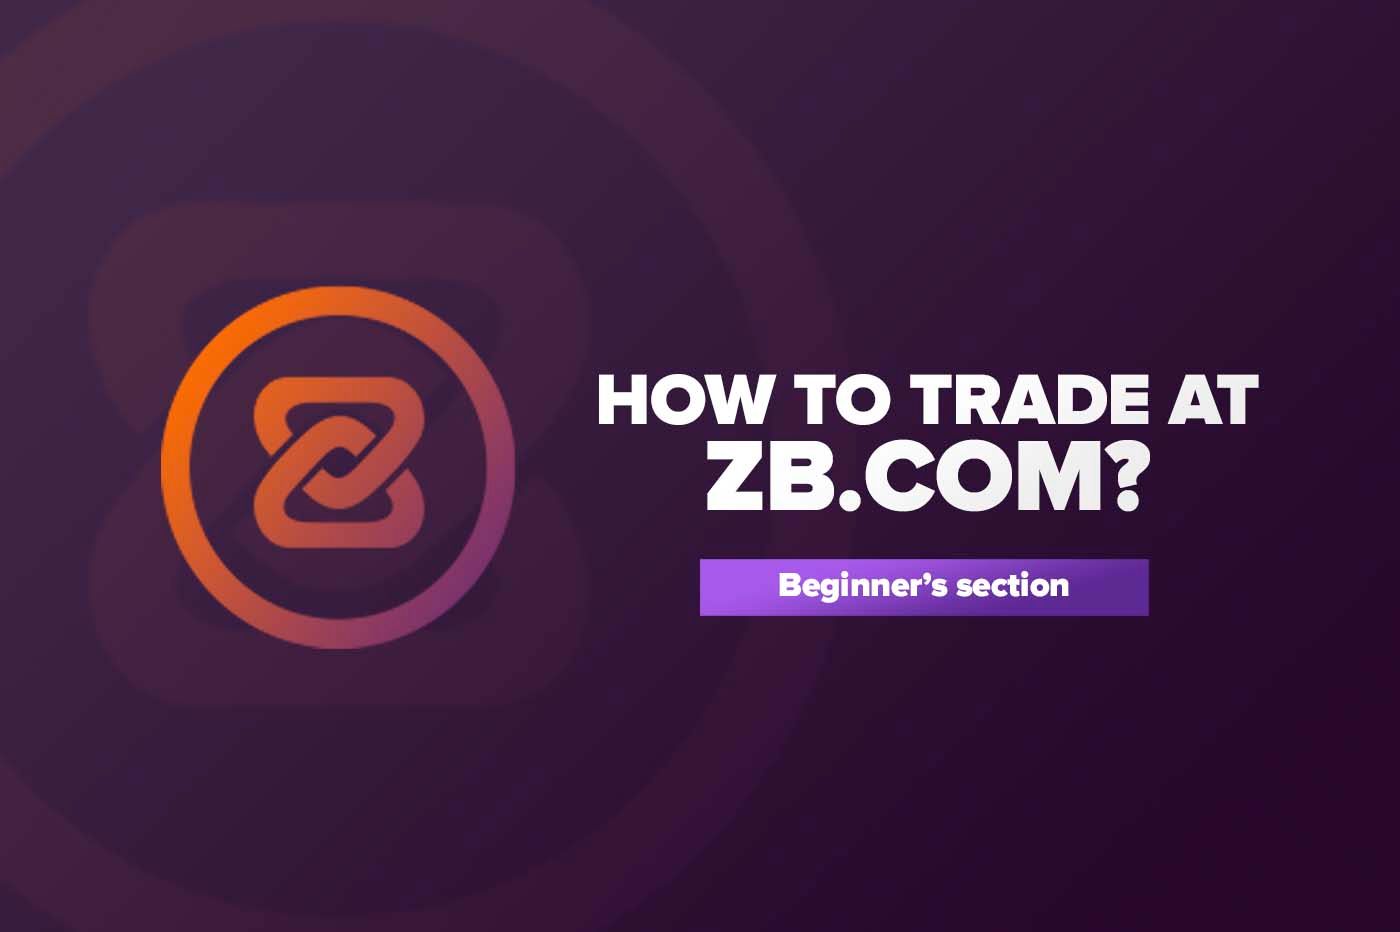 Article How to trade at ZB.COM?